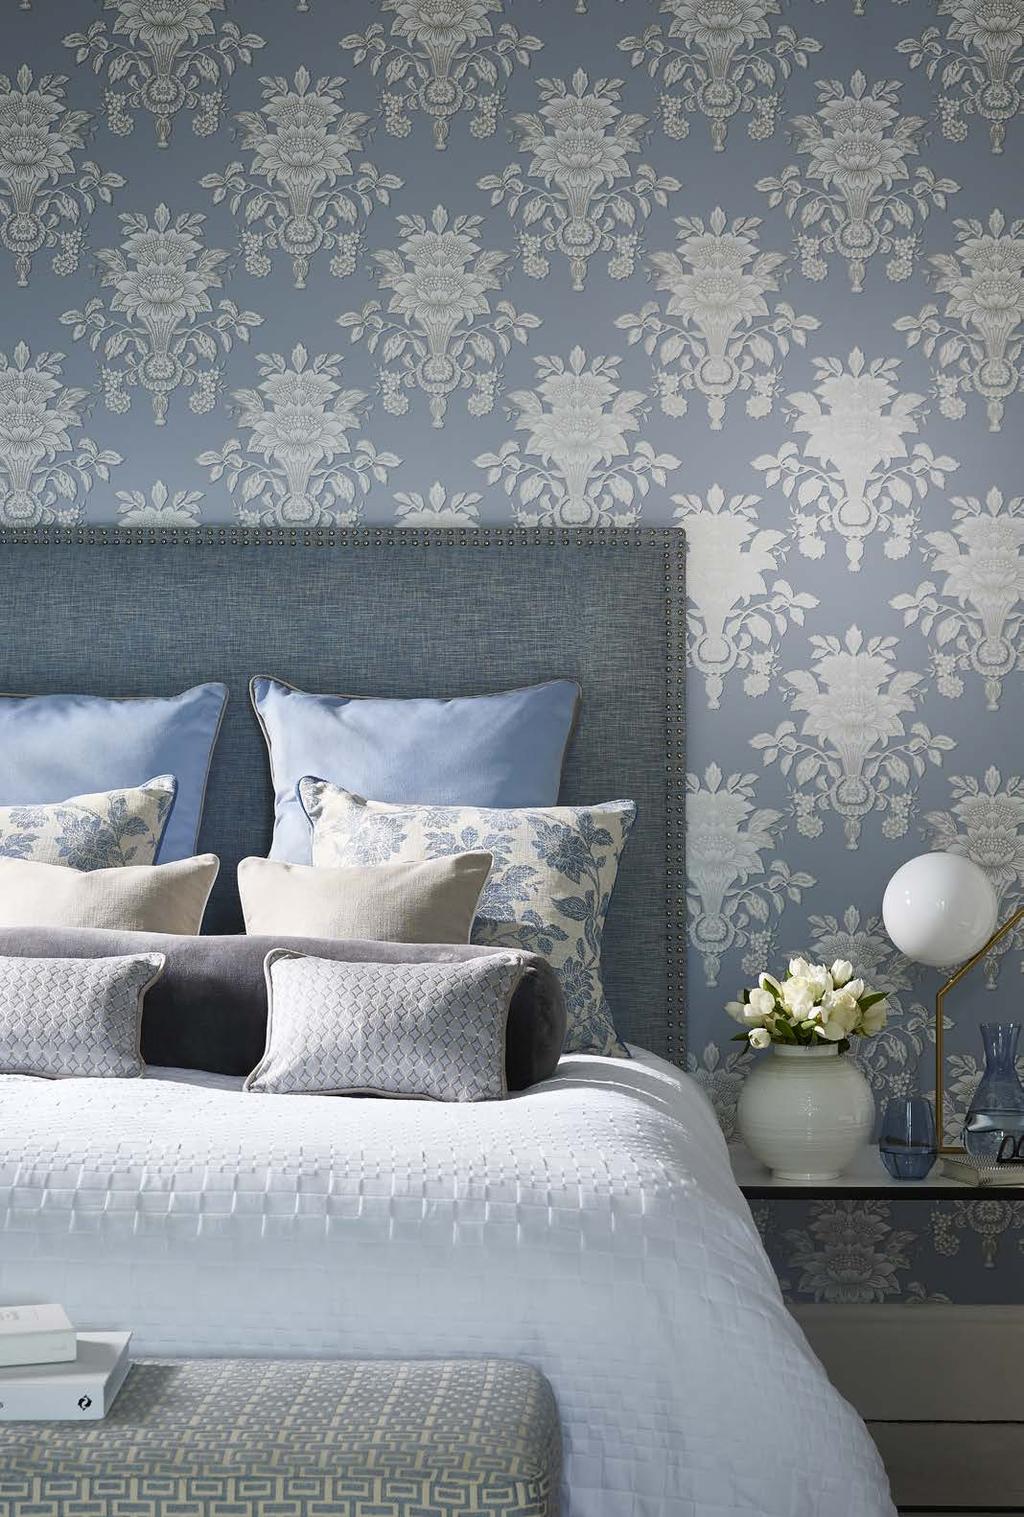 THE FUTURE OF HERITAGE Blendworth have worked alongside Wedgwood to create a collection of fabrics and wallcoverings inspired by the brand s impressive design archive.